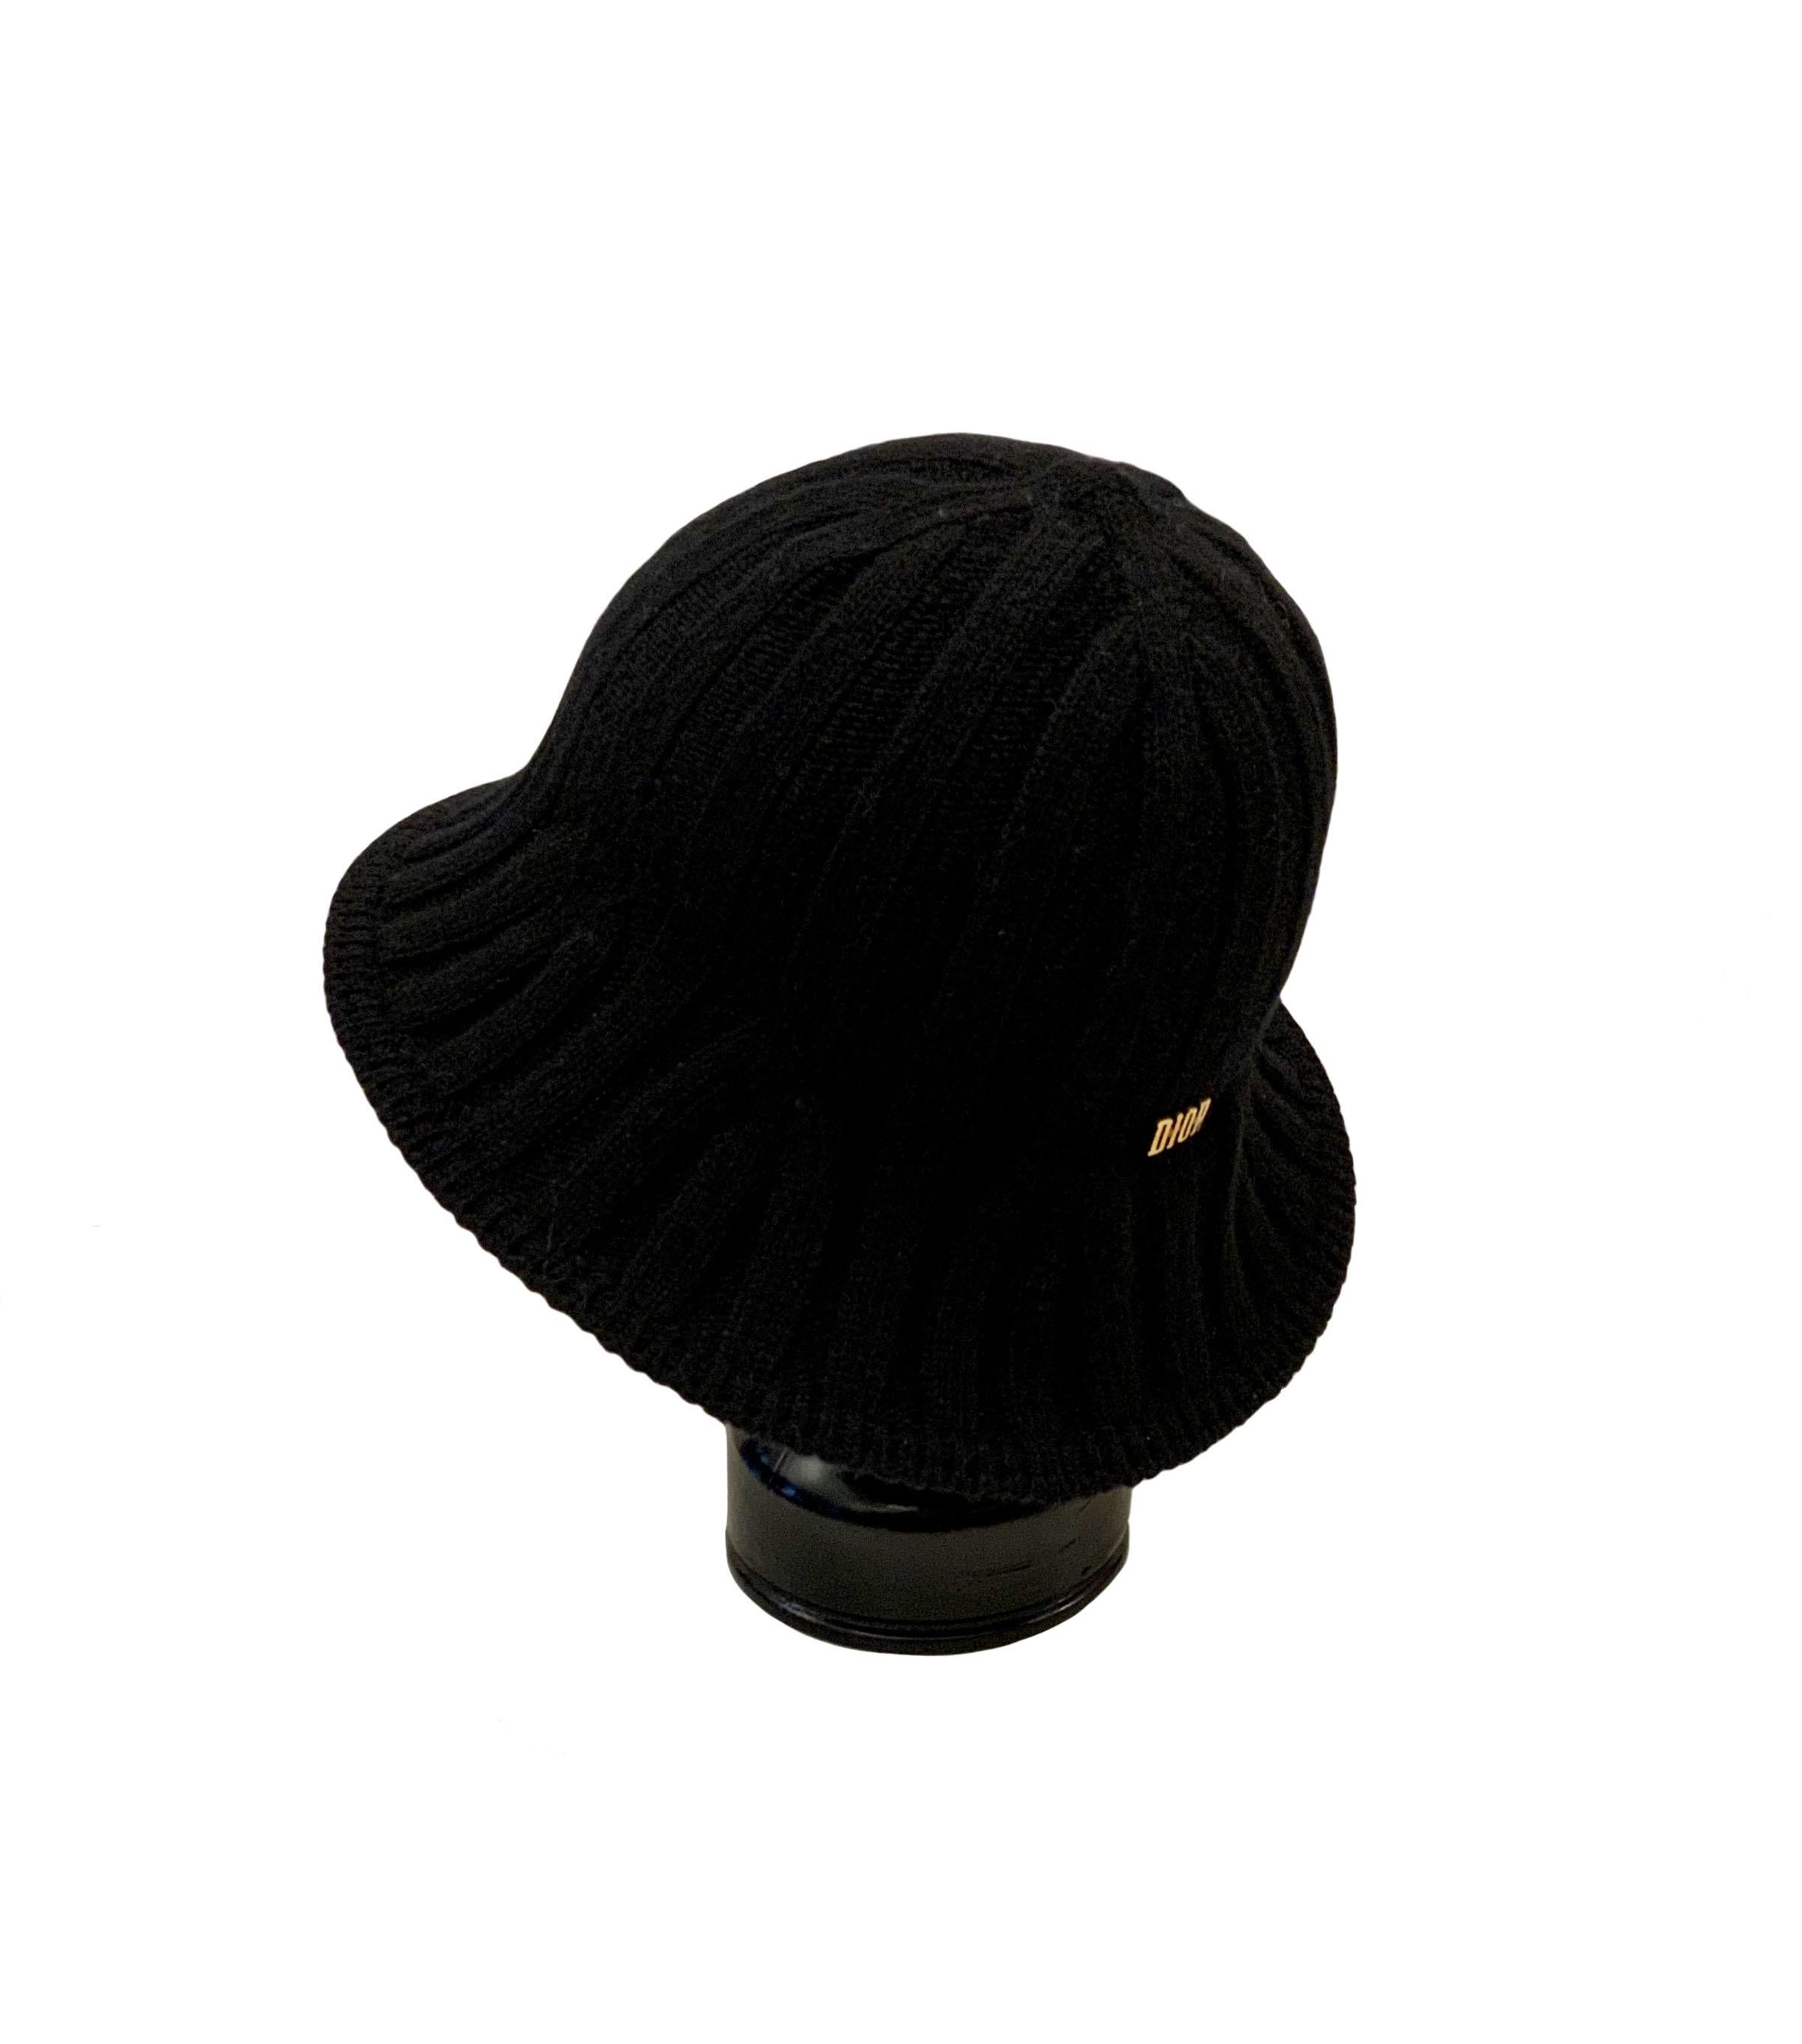 This knit hat from the house of Christian Dior is designed in a tulip flower shape giving its name the Arty Heather Tulip !

Collection: Pre-Fall 2019 Ready to Wear
Fabric: 94% wool, 5% nylon, 1% polyurethane
Color: black
Size: U
Measurements: